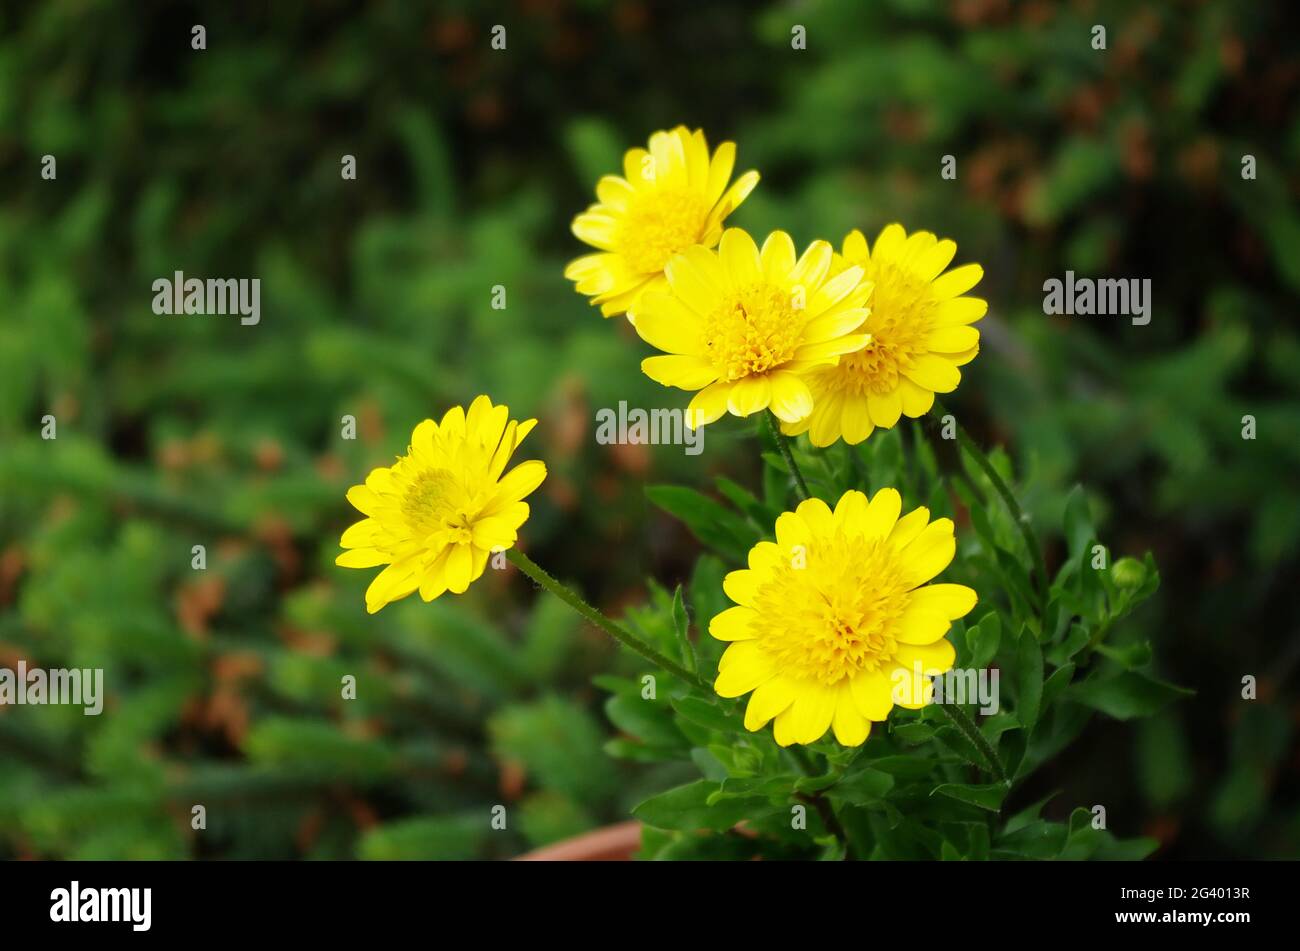 Osteospermum flower daisy. Beautiful blooming yellow flowers in the garden. Floral background close up outdoors with green leaves. Stock Photo